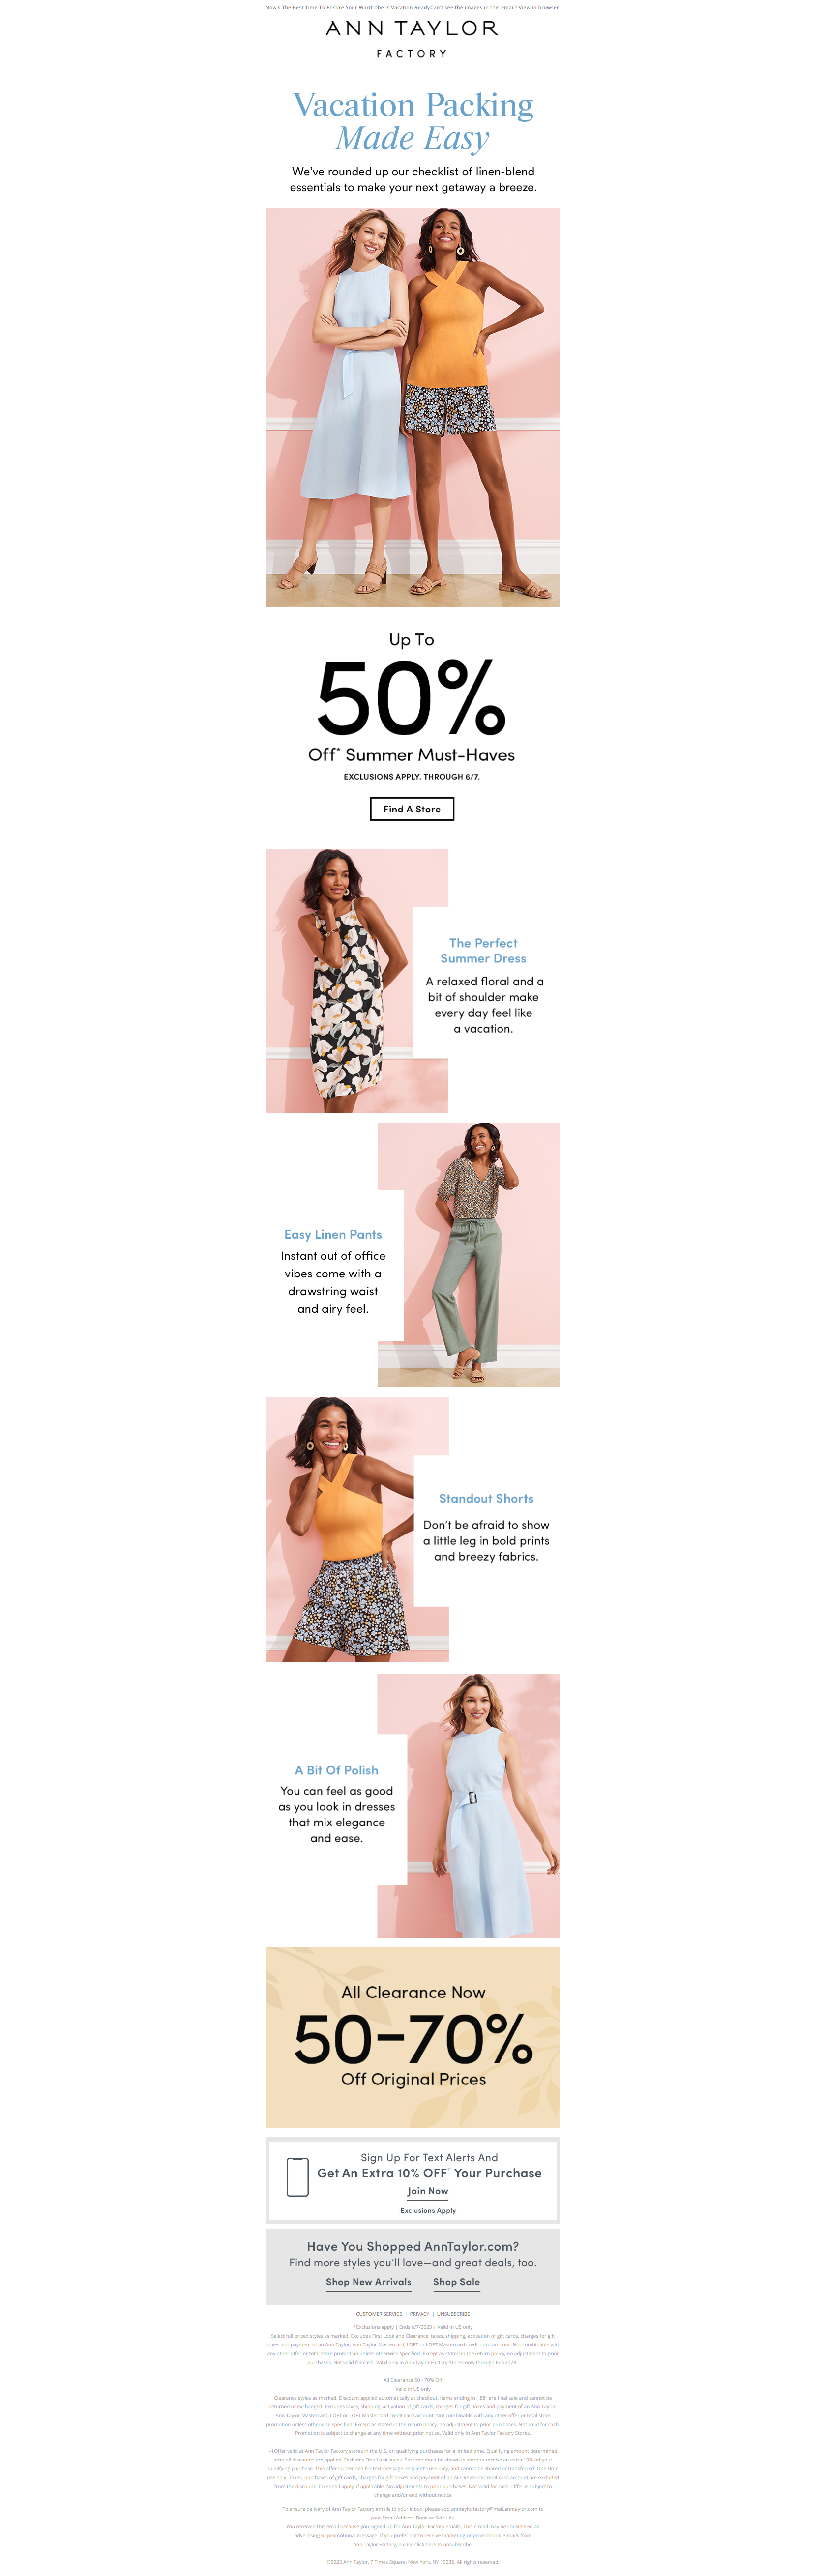 Every Look For Your Packing List, Now Up To 50% Off - Ann Taylor Factory Newsletter